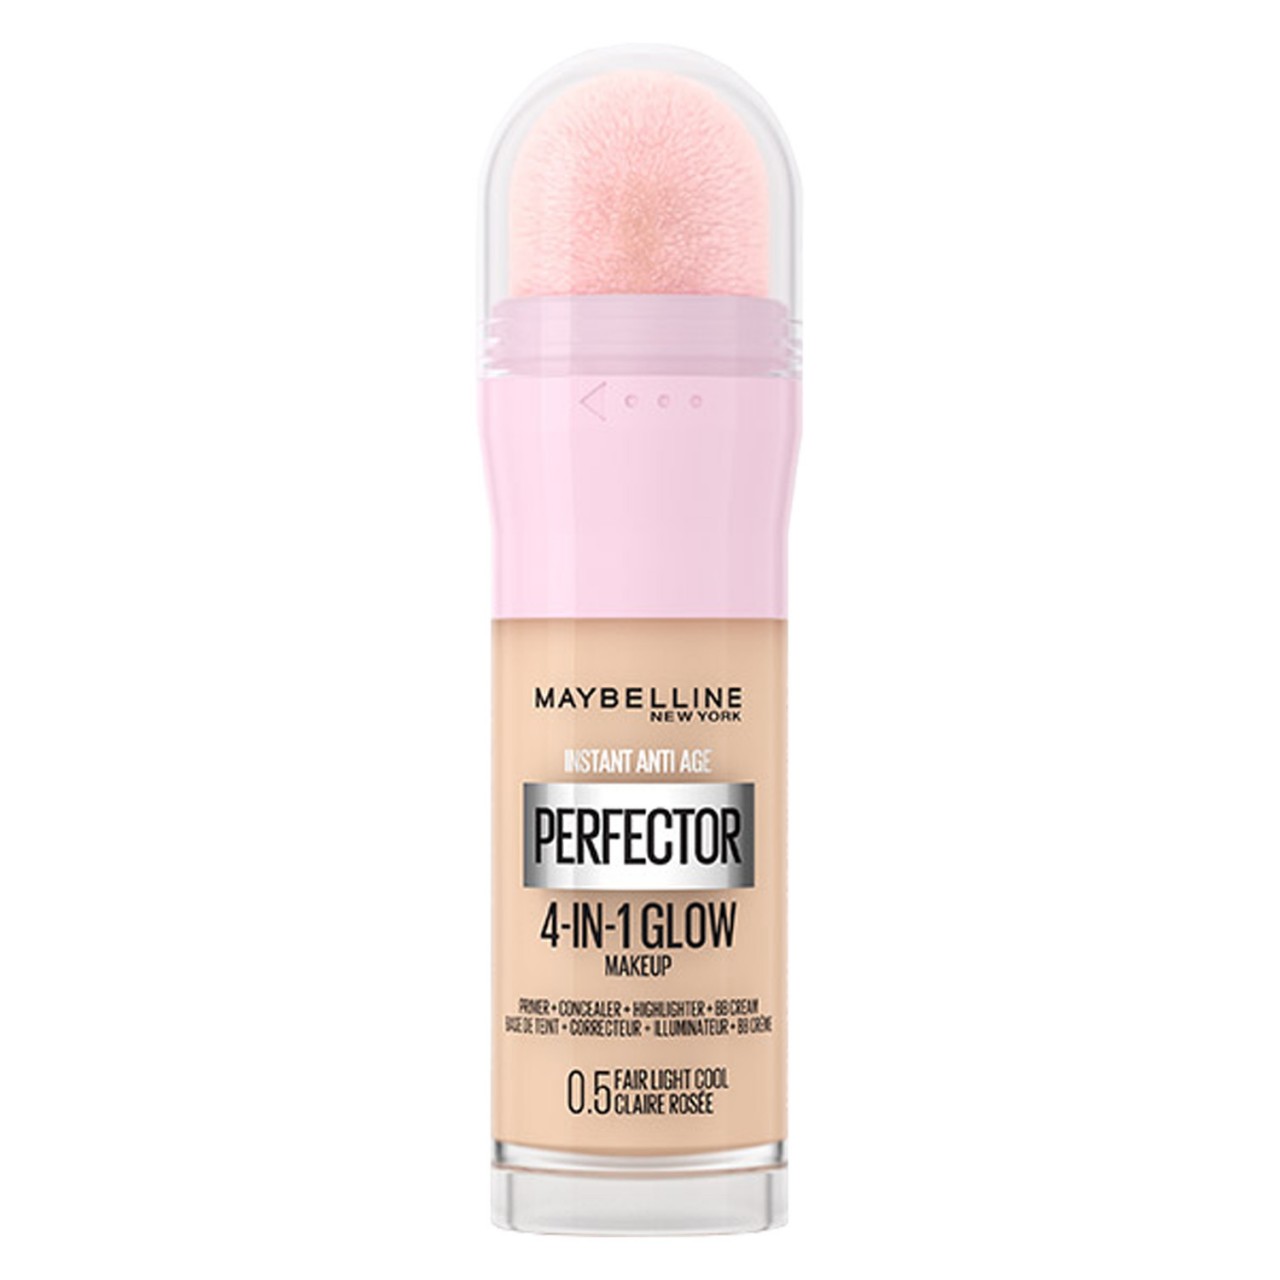 Maybelline NY Teint - Instant Perfector Glow 4-in-1 Make-Up Fair-Light Cool von Maybelline New York